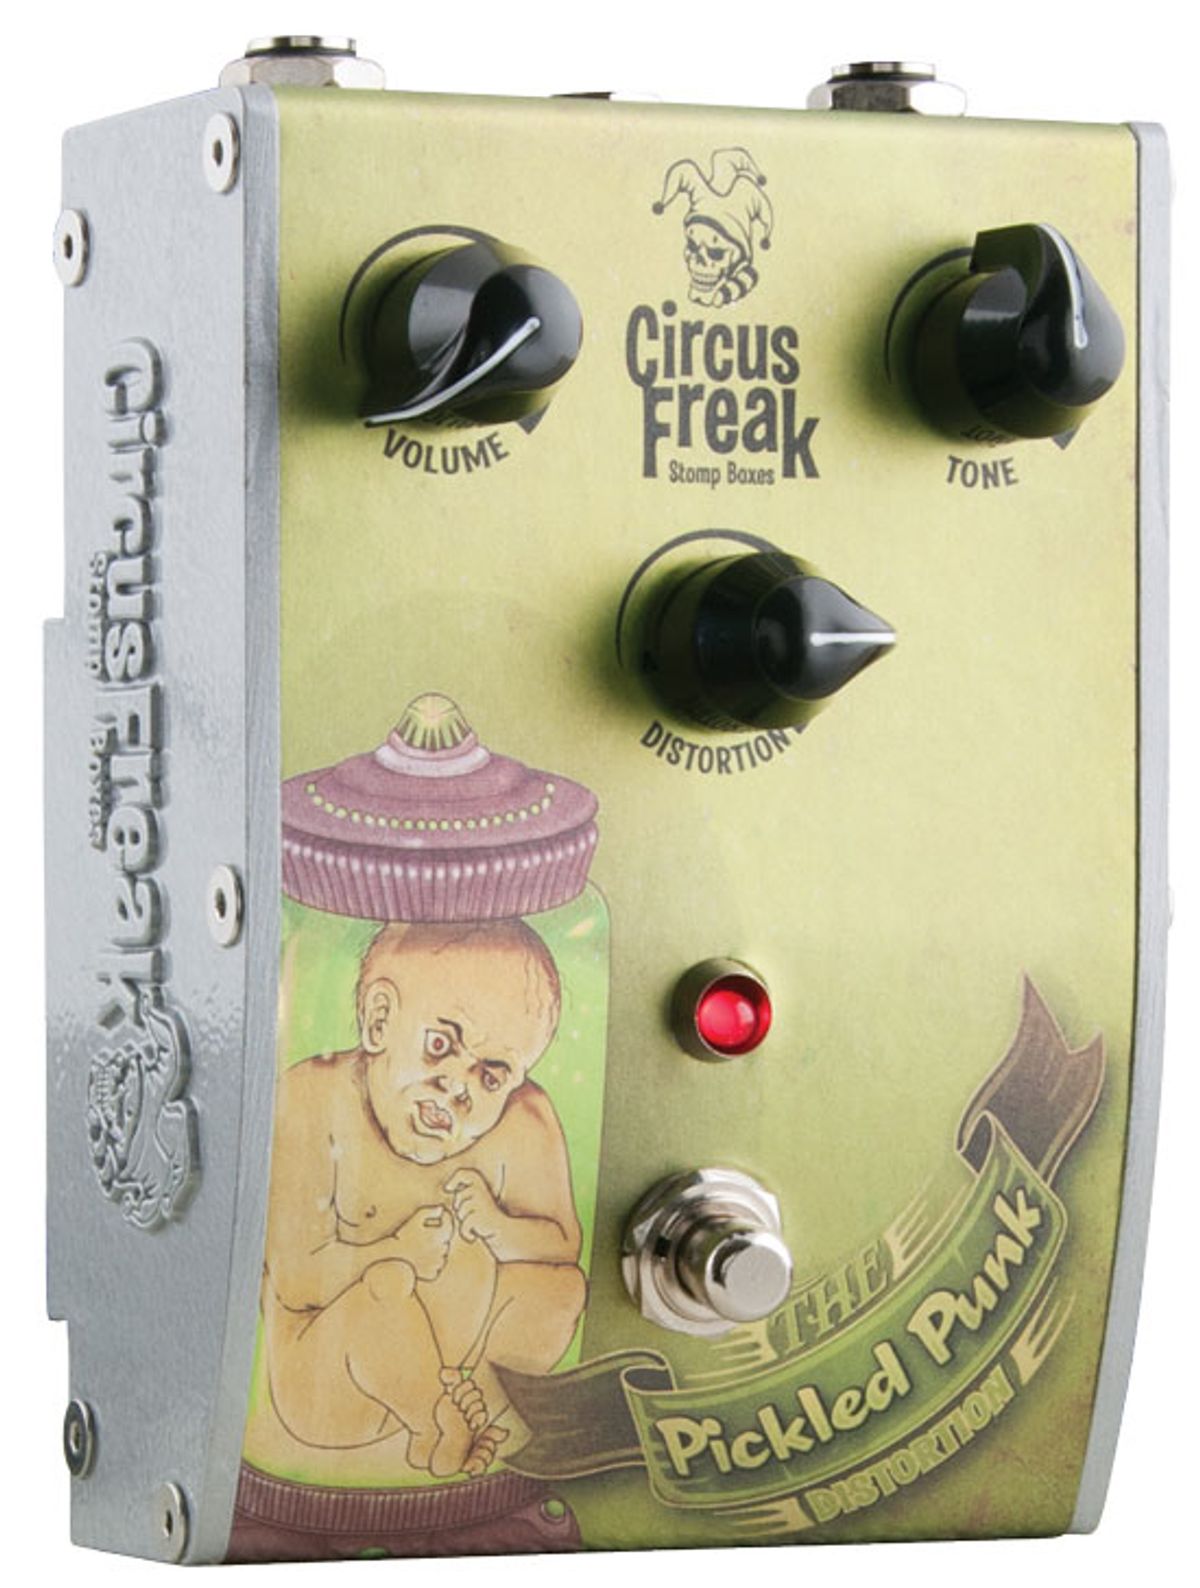 Circus Freak Pickled Punk Pedal Review